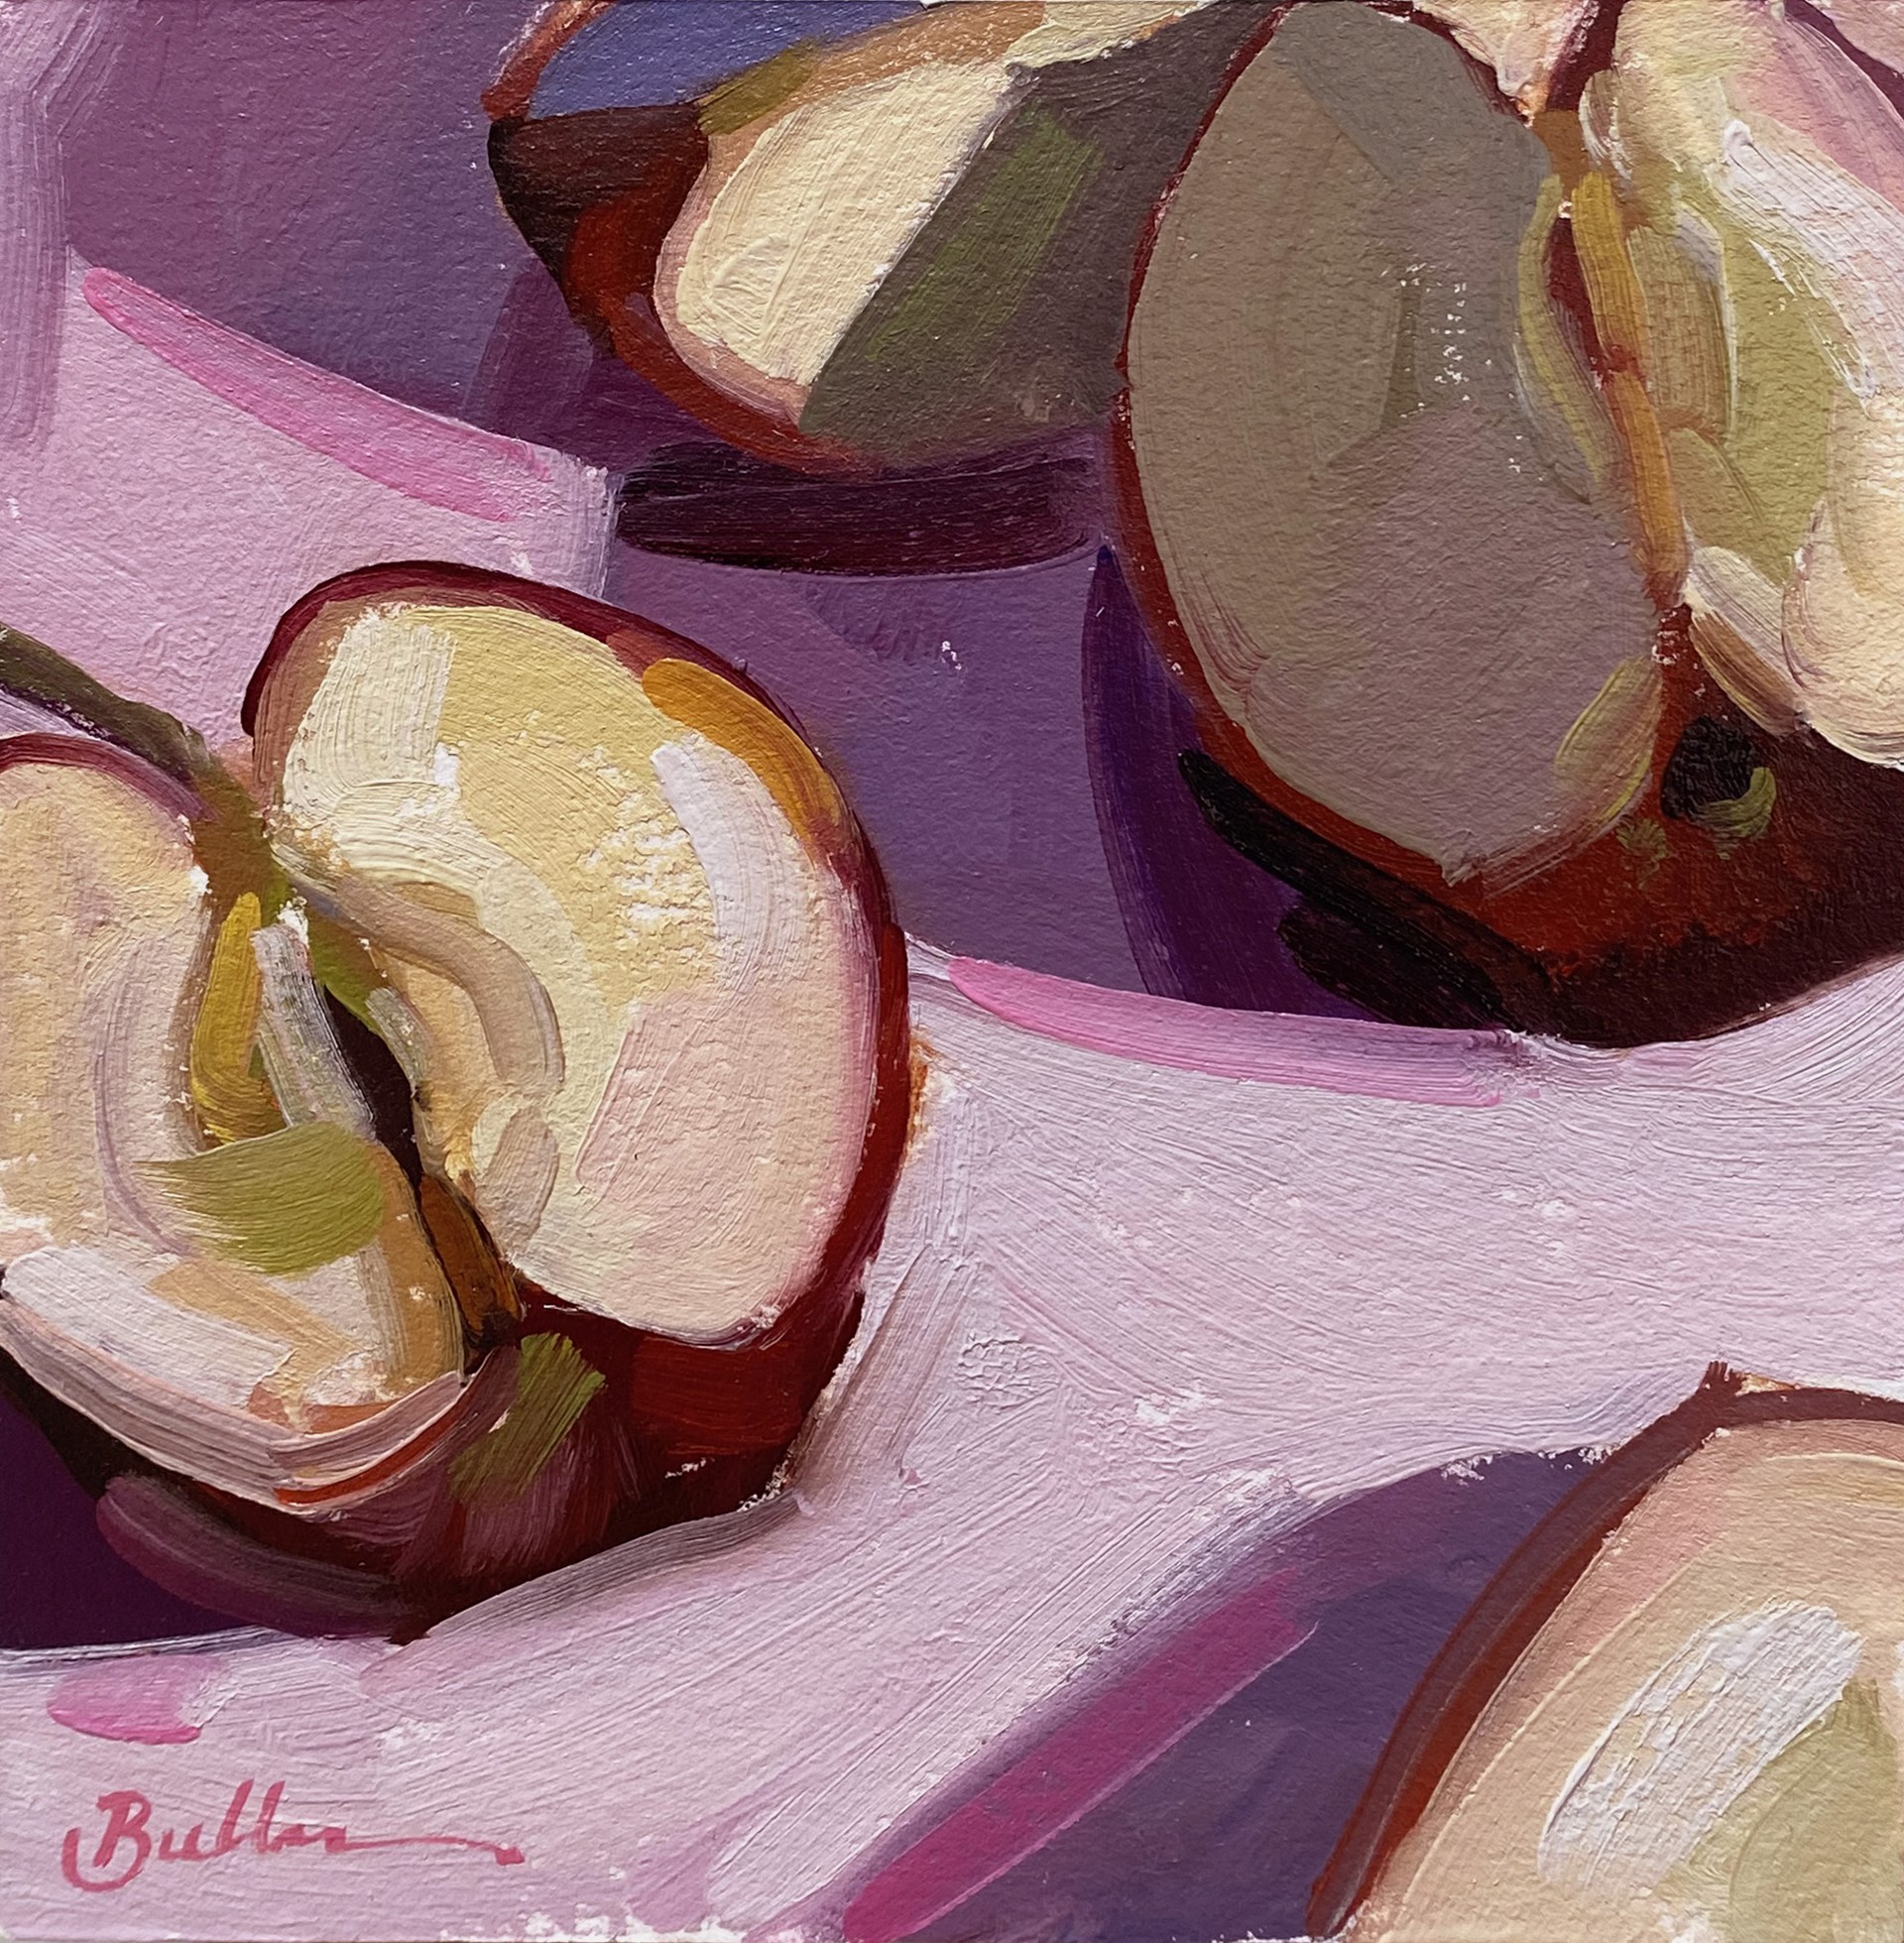 Cut Apples on Pink by Samantha Buller